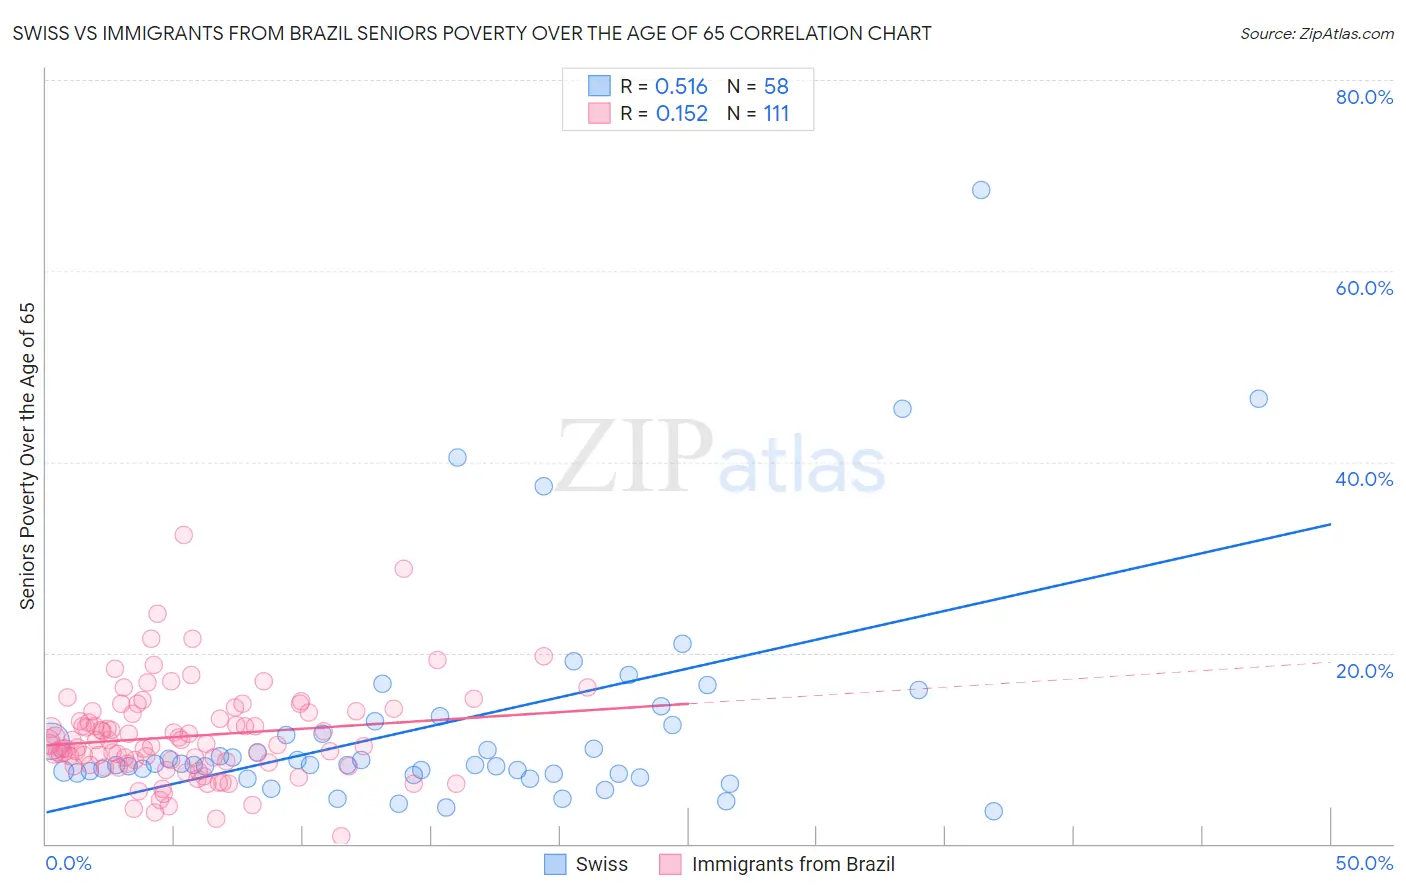 Swiss vs Immigrants from Brazil Seniors Poverty Over the Age of 65